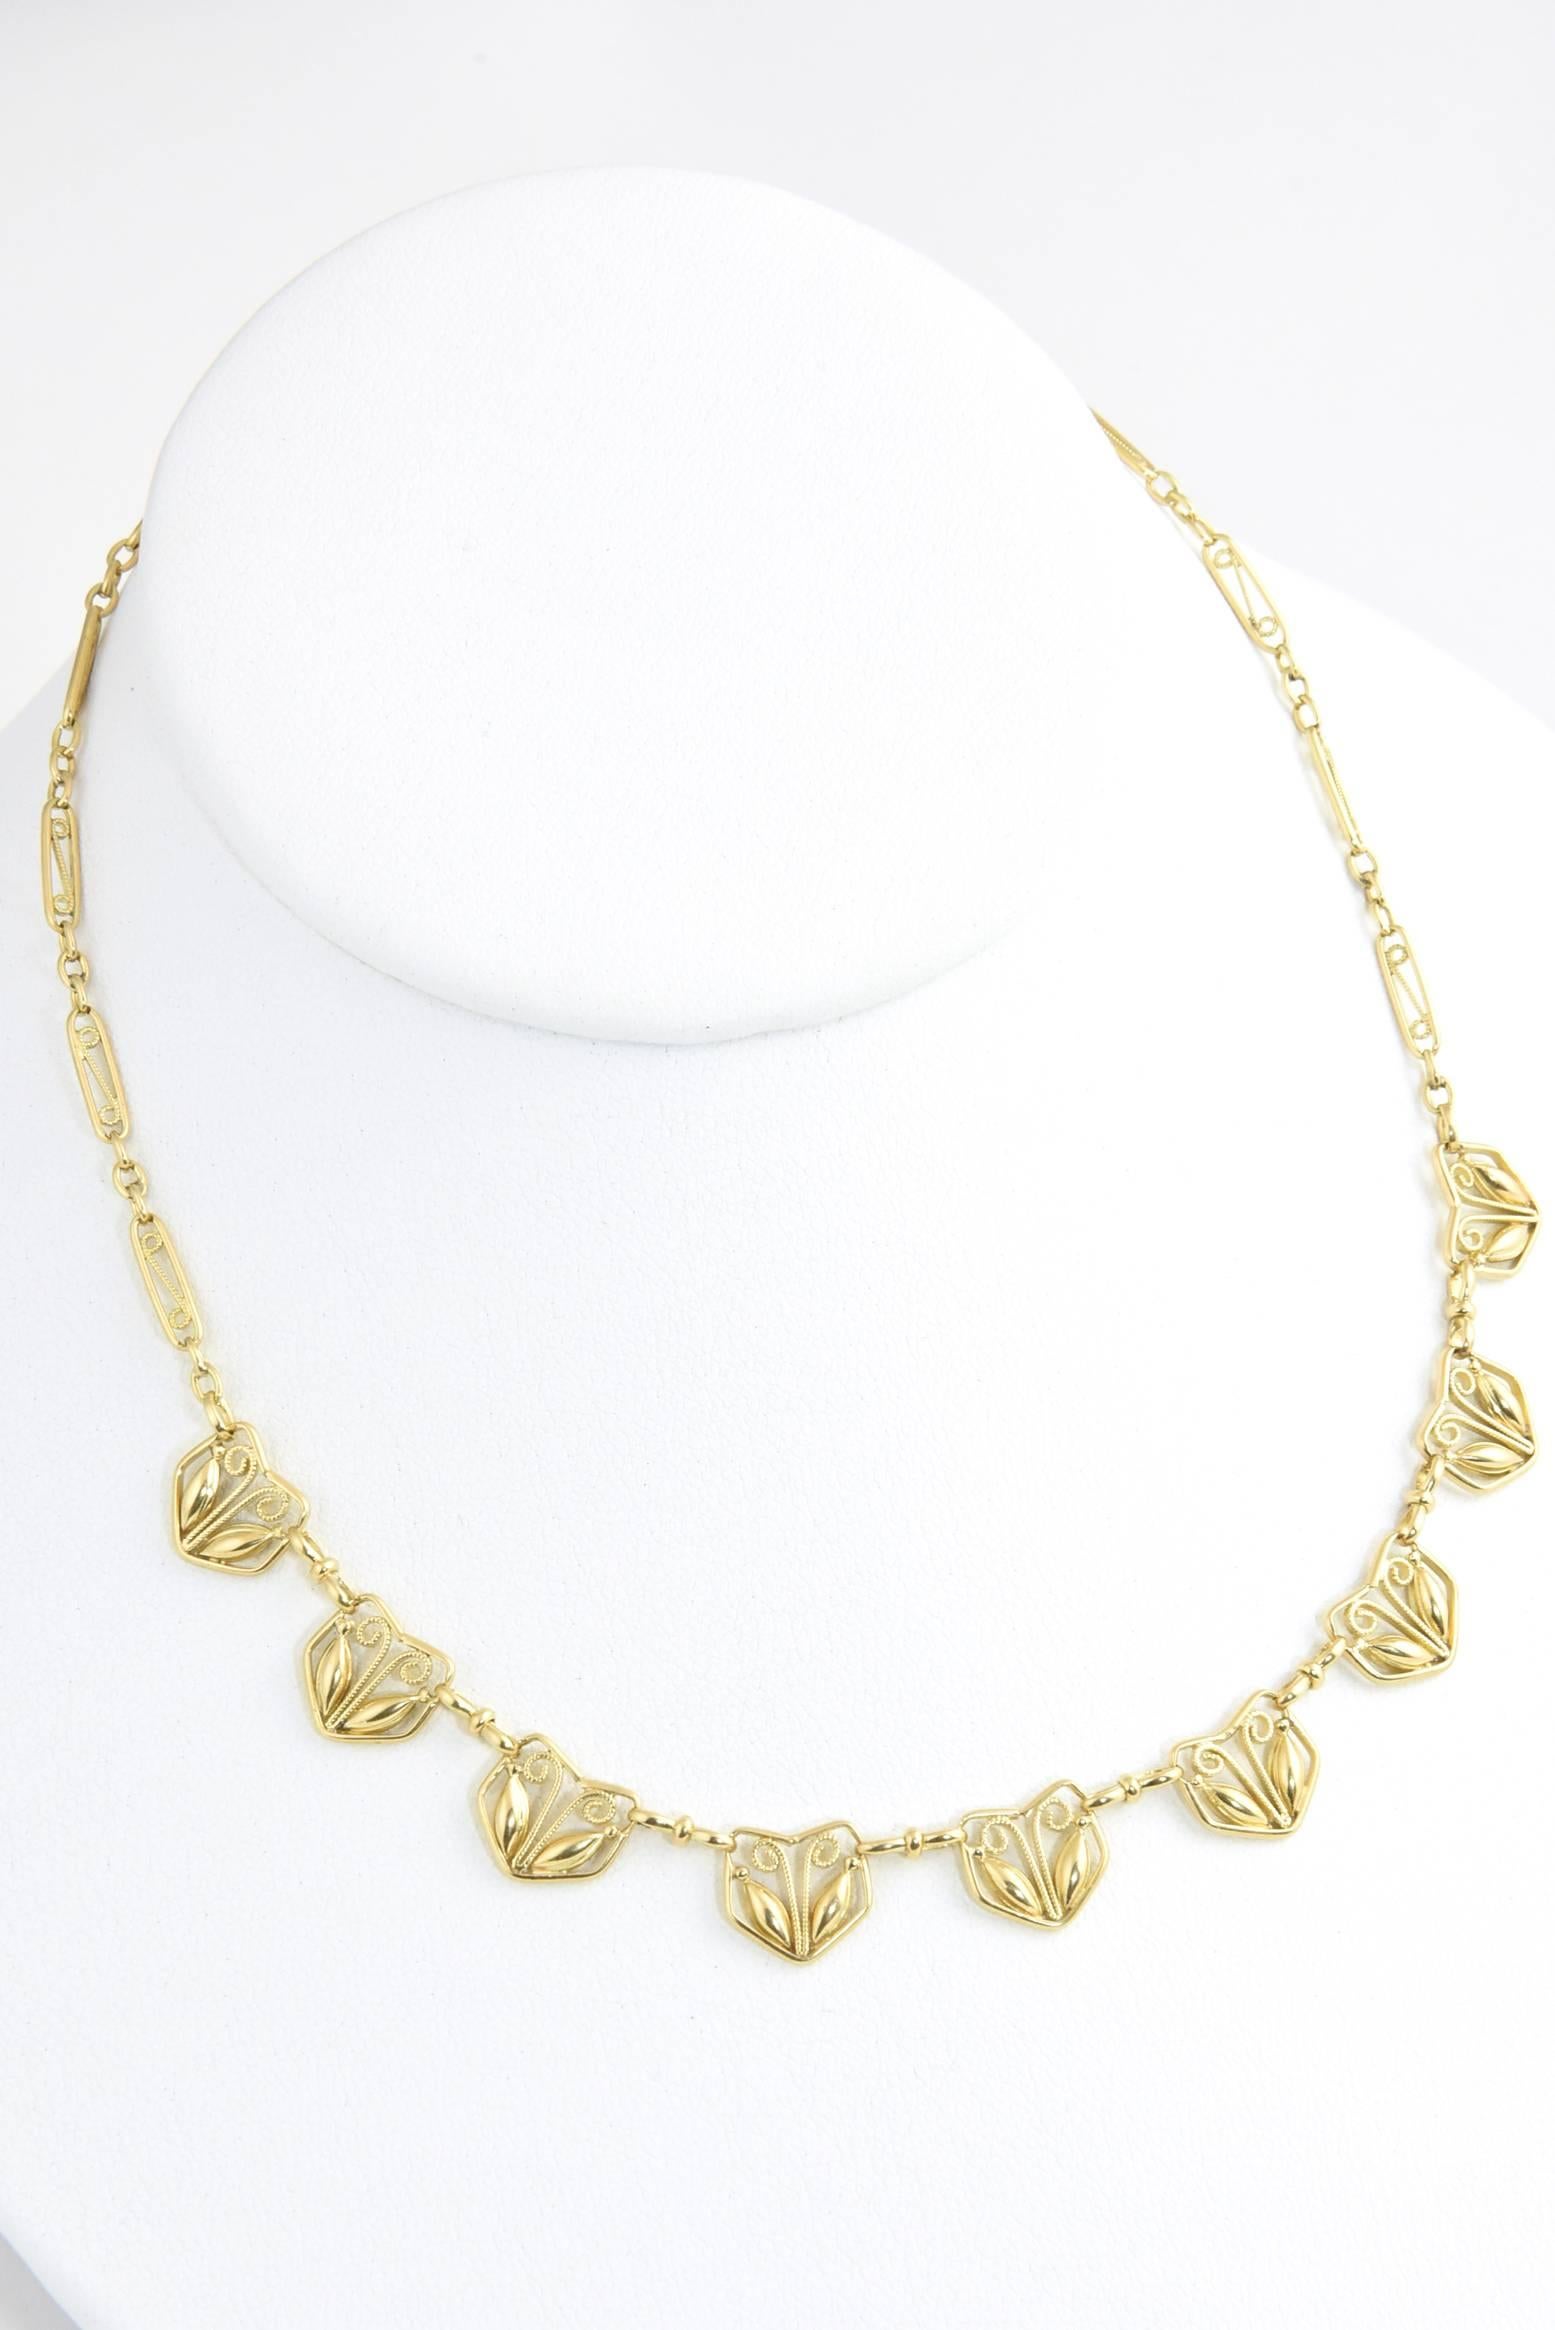 From the Arts & Crafts movement which dates from 1880 - 1910. This beautiful 19 karat gold French necklace is 14.5